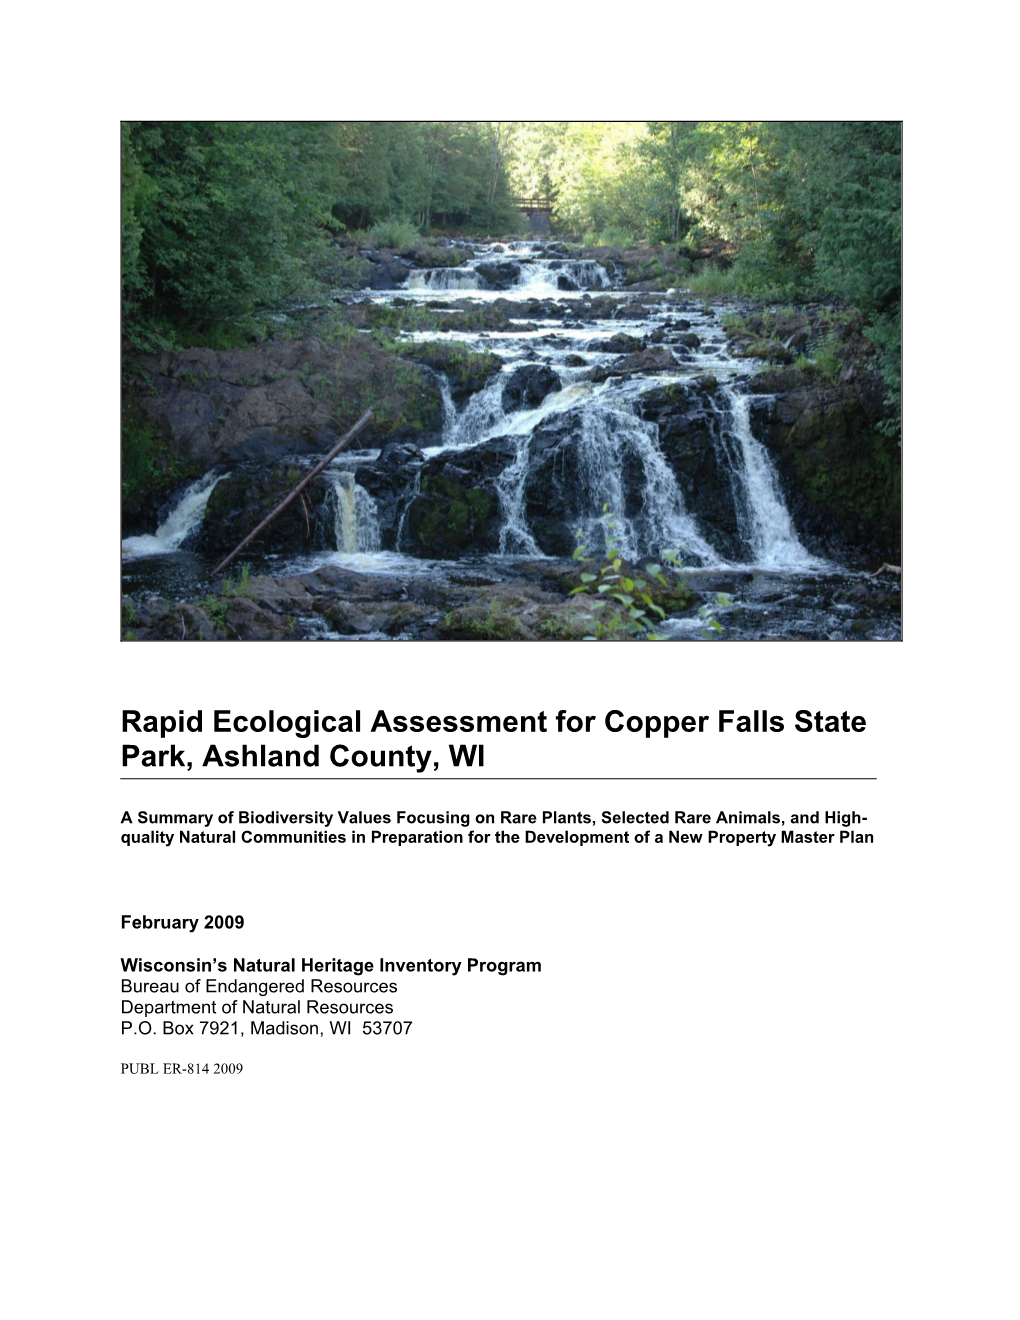 Rapid Ecological Assessment for Copper Falls State Park, Ashland County, WI